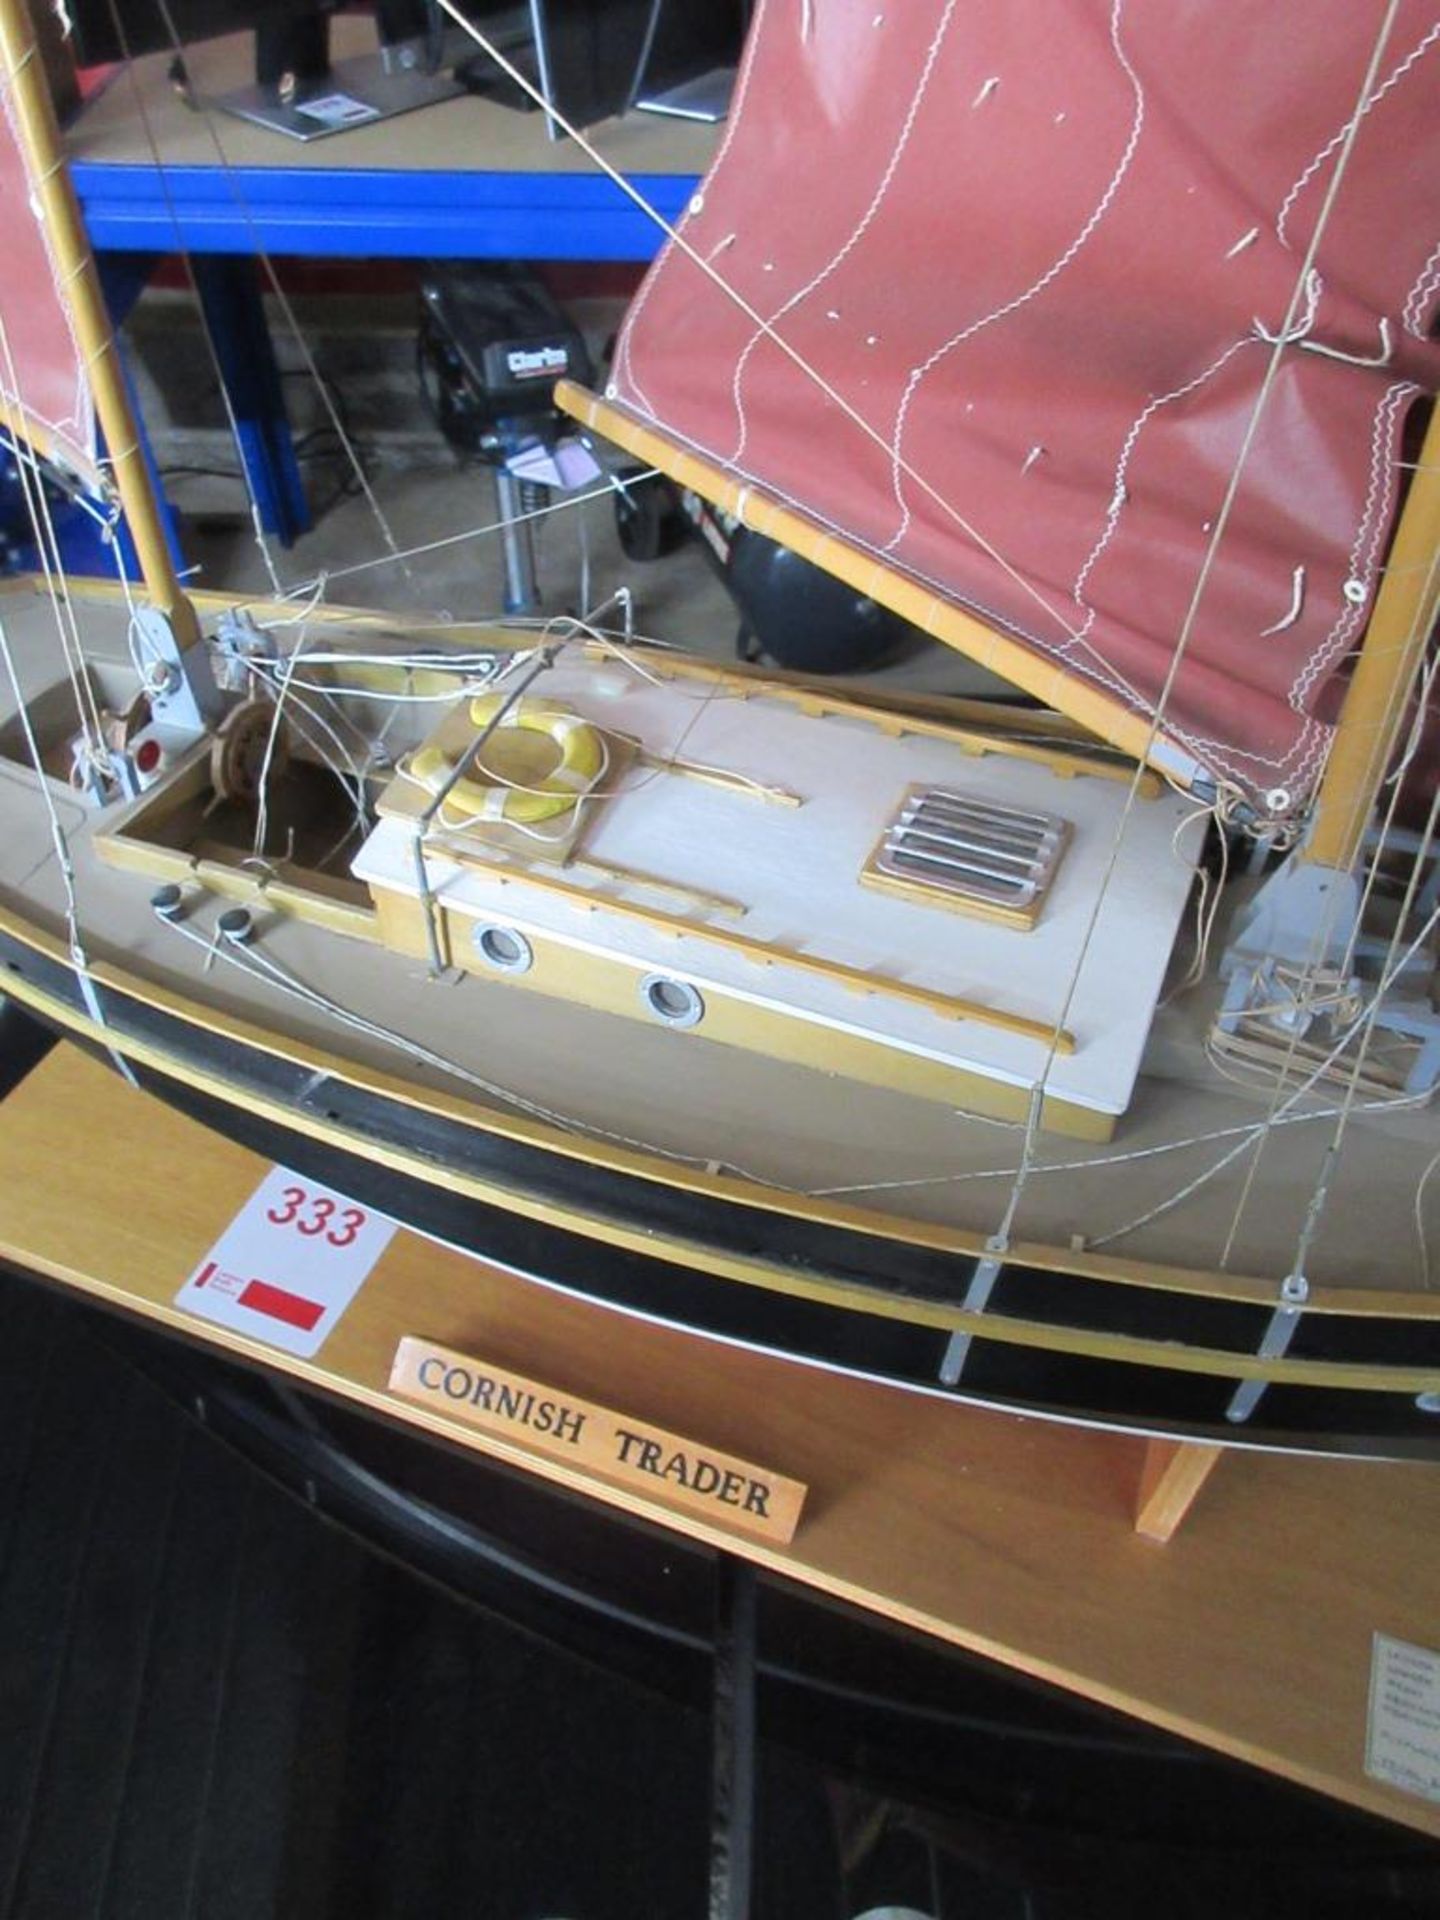 Cornish Crabbers sailing boat model on stand, name plaque with “Cornish Tender” - Image 2 of 4